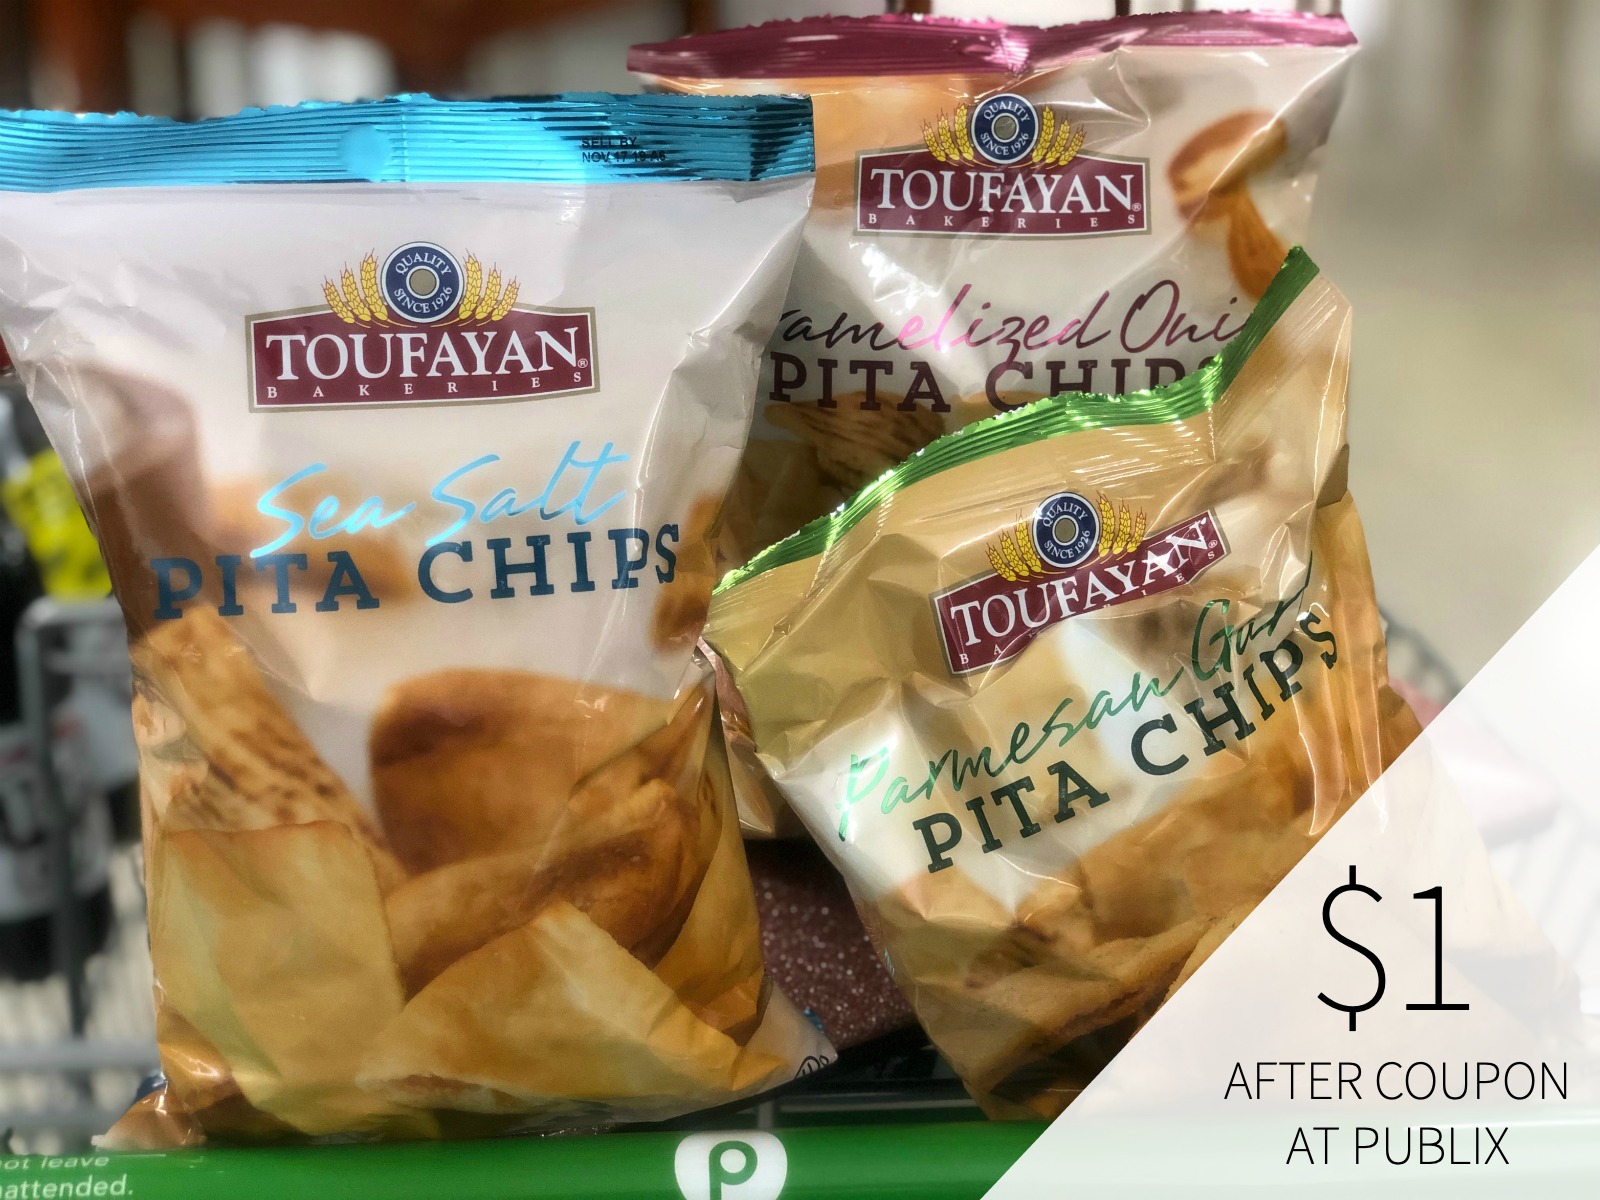 Toufayan Pita Chips Are Buy One, Get One FREE This Week At Publix! on I Heart Publix 3